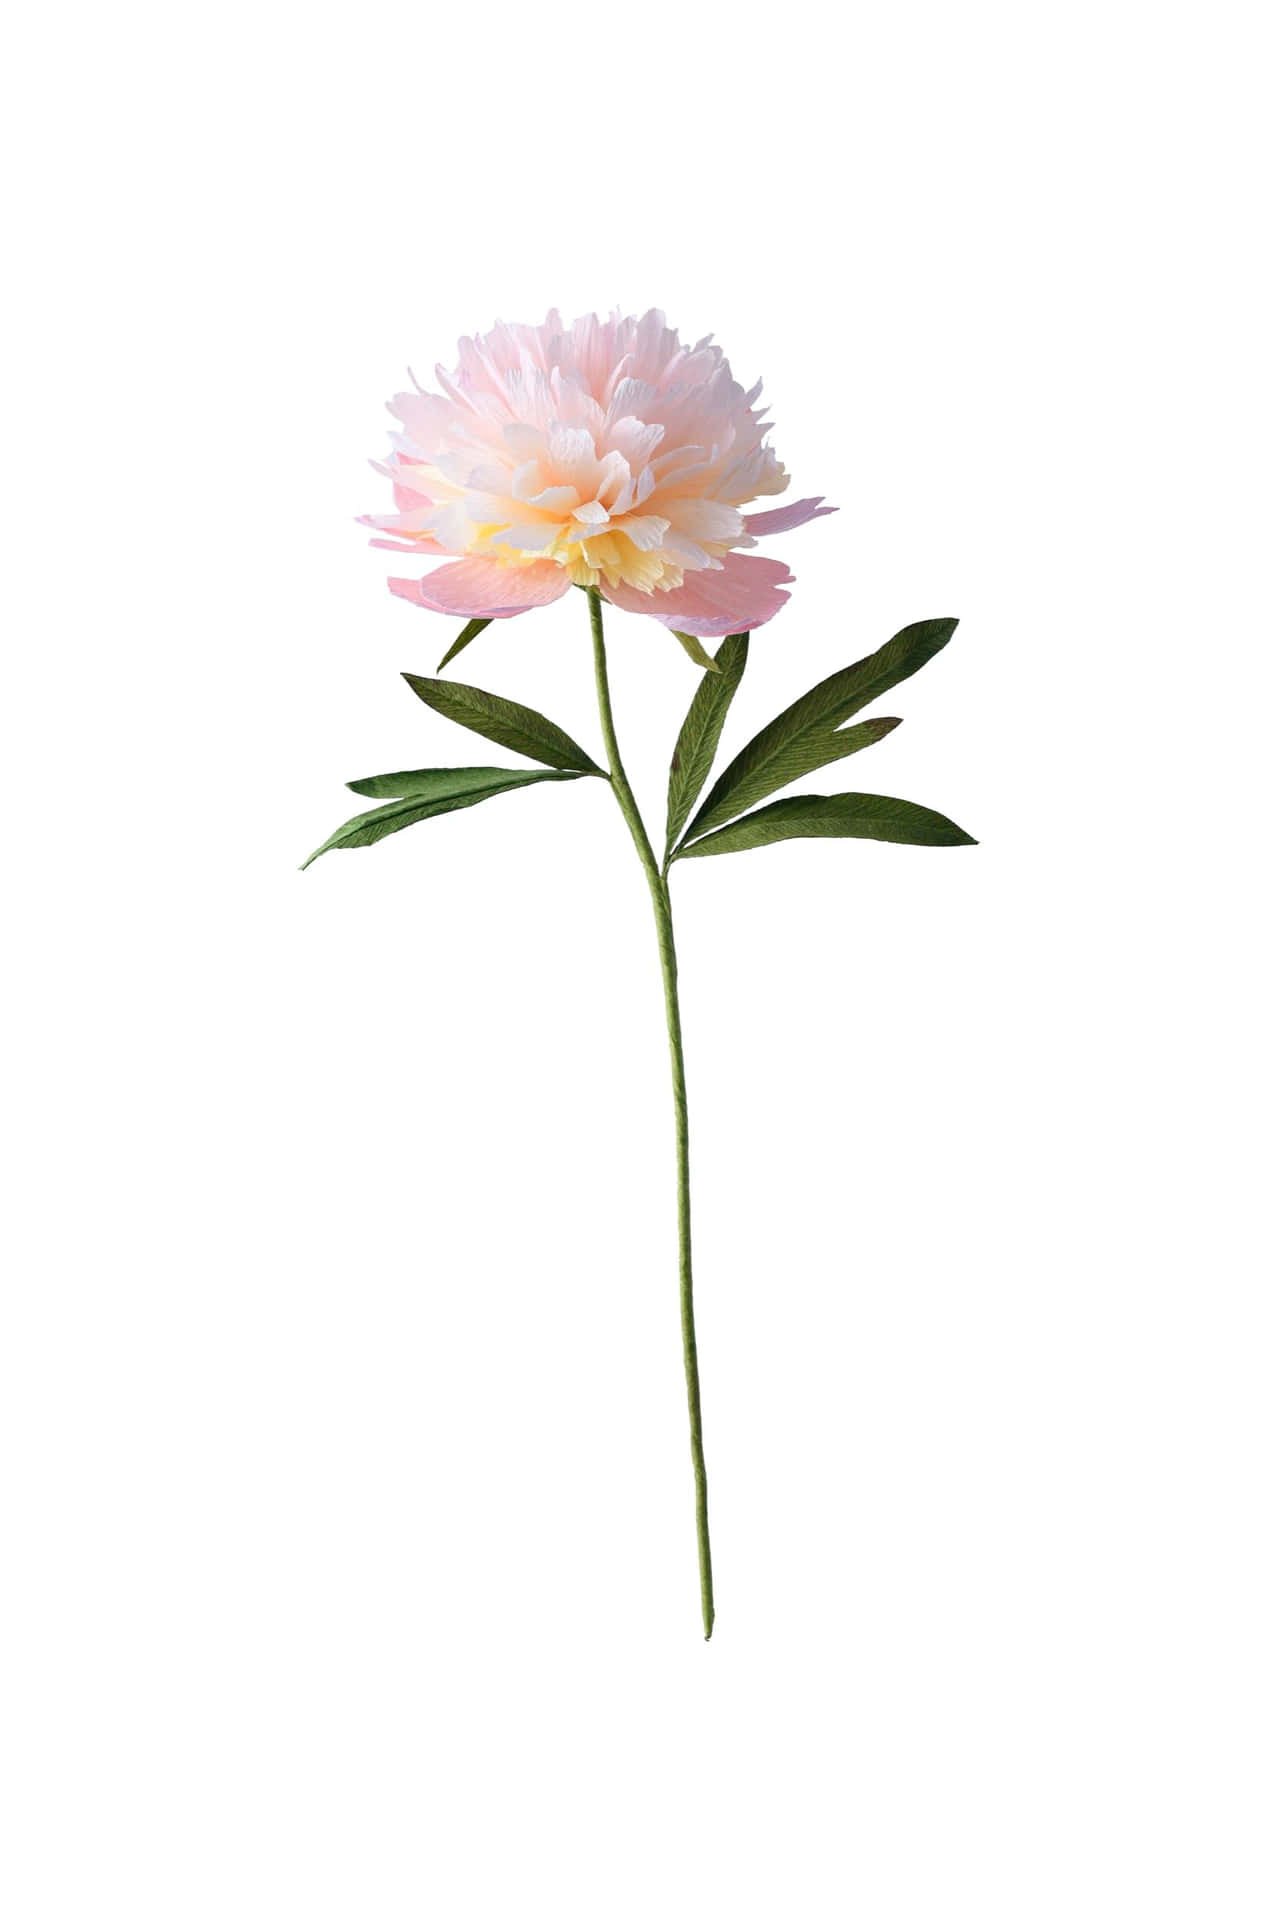 A Pink Flower Is On A Stem Against A White Background